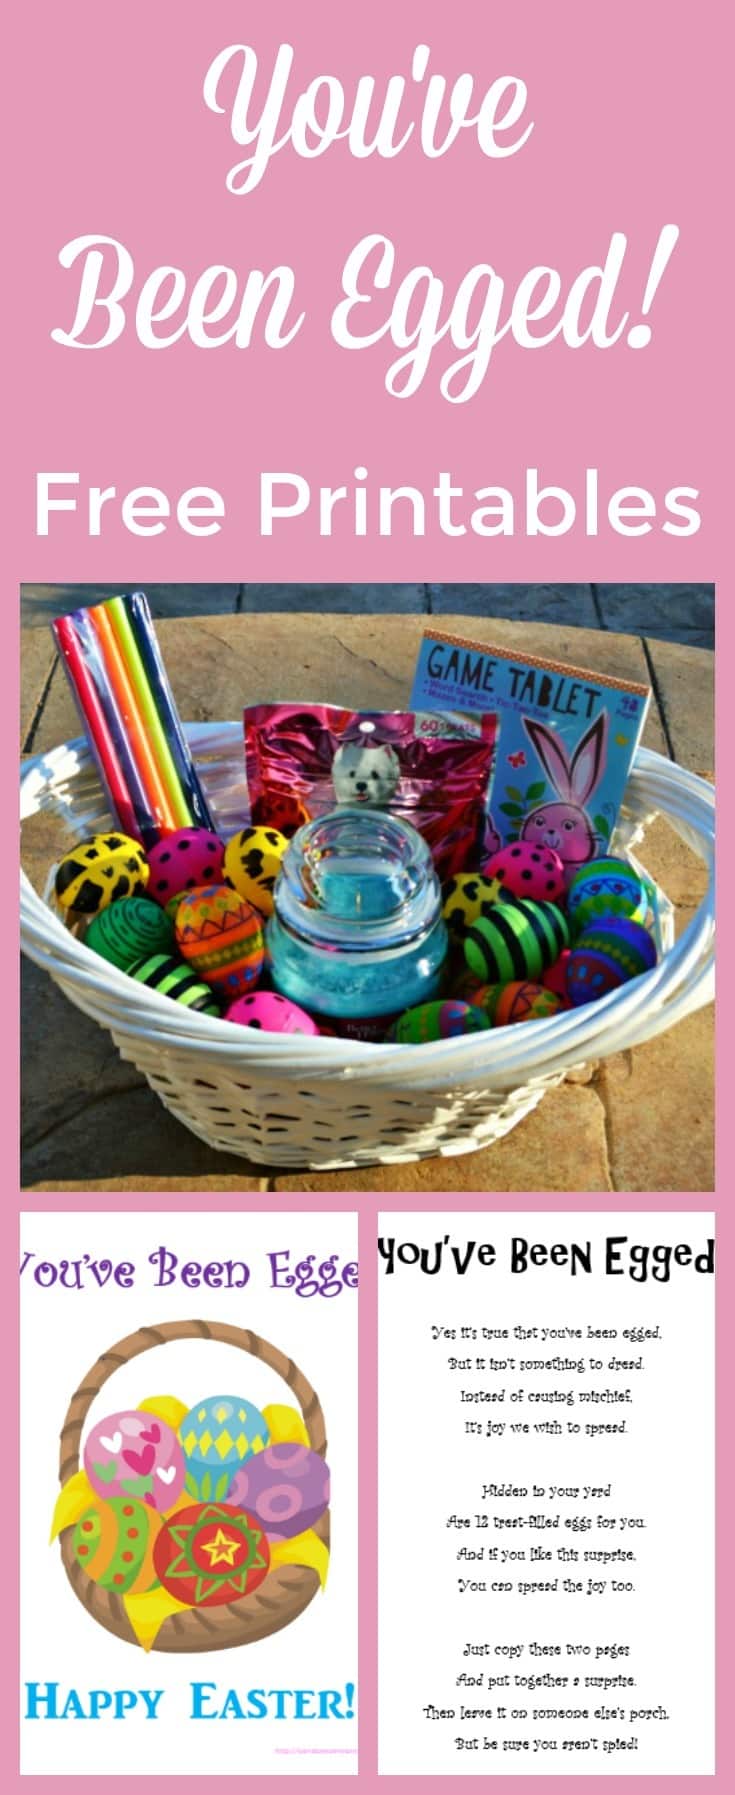 Every Easter my family likes to "egg" friends and neighbors. If you aren't familiar with the You've Been Egged tradition, read on. #youvebeenegged #easter #eastertradition via @wondermomwannab